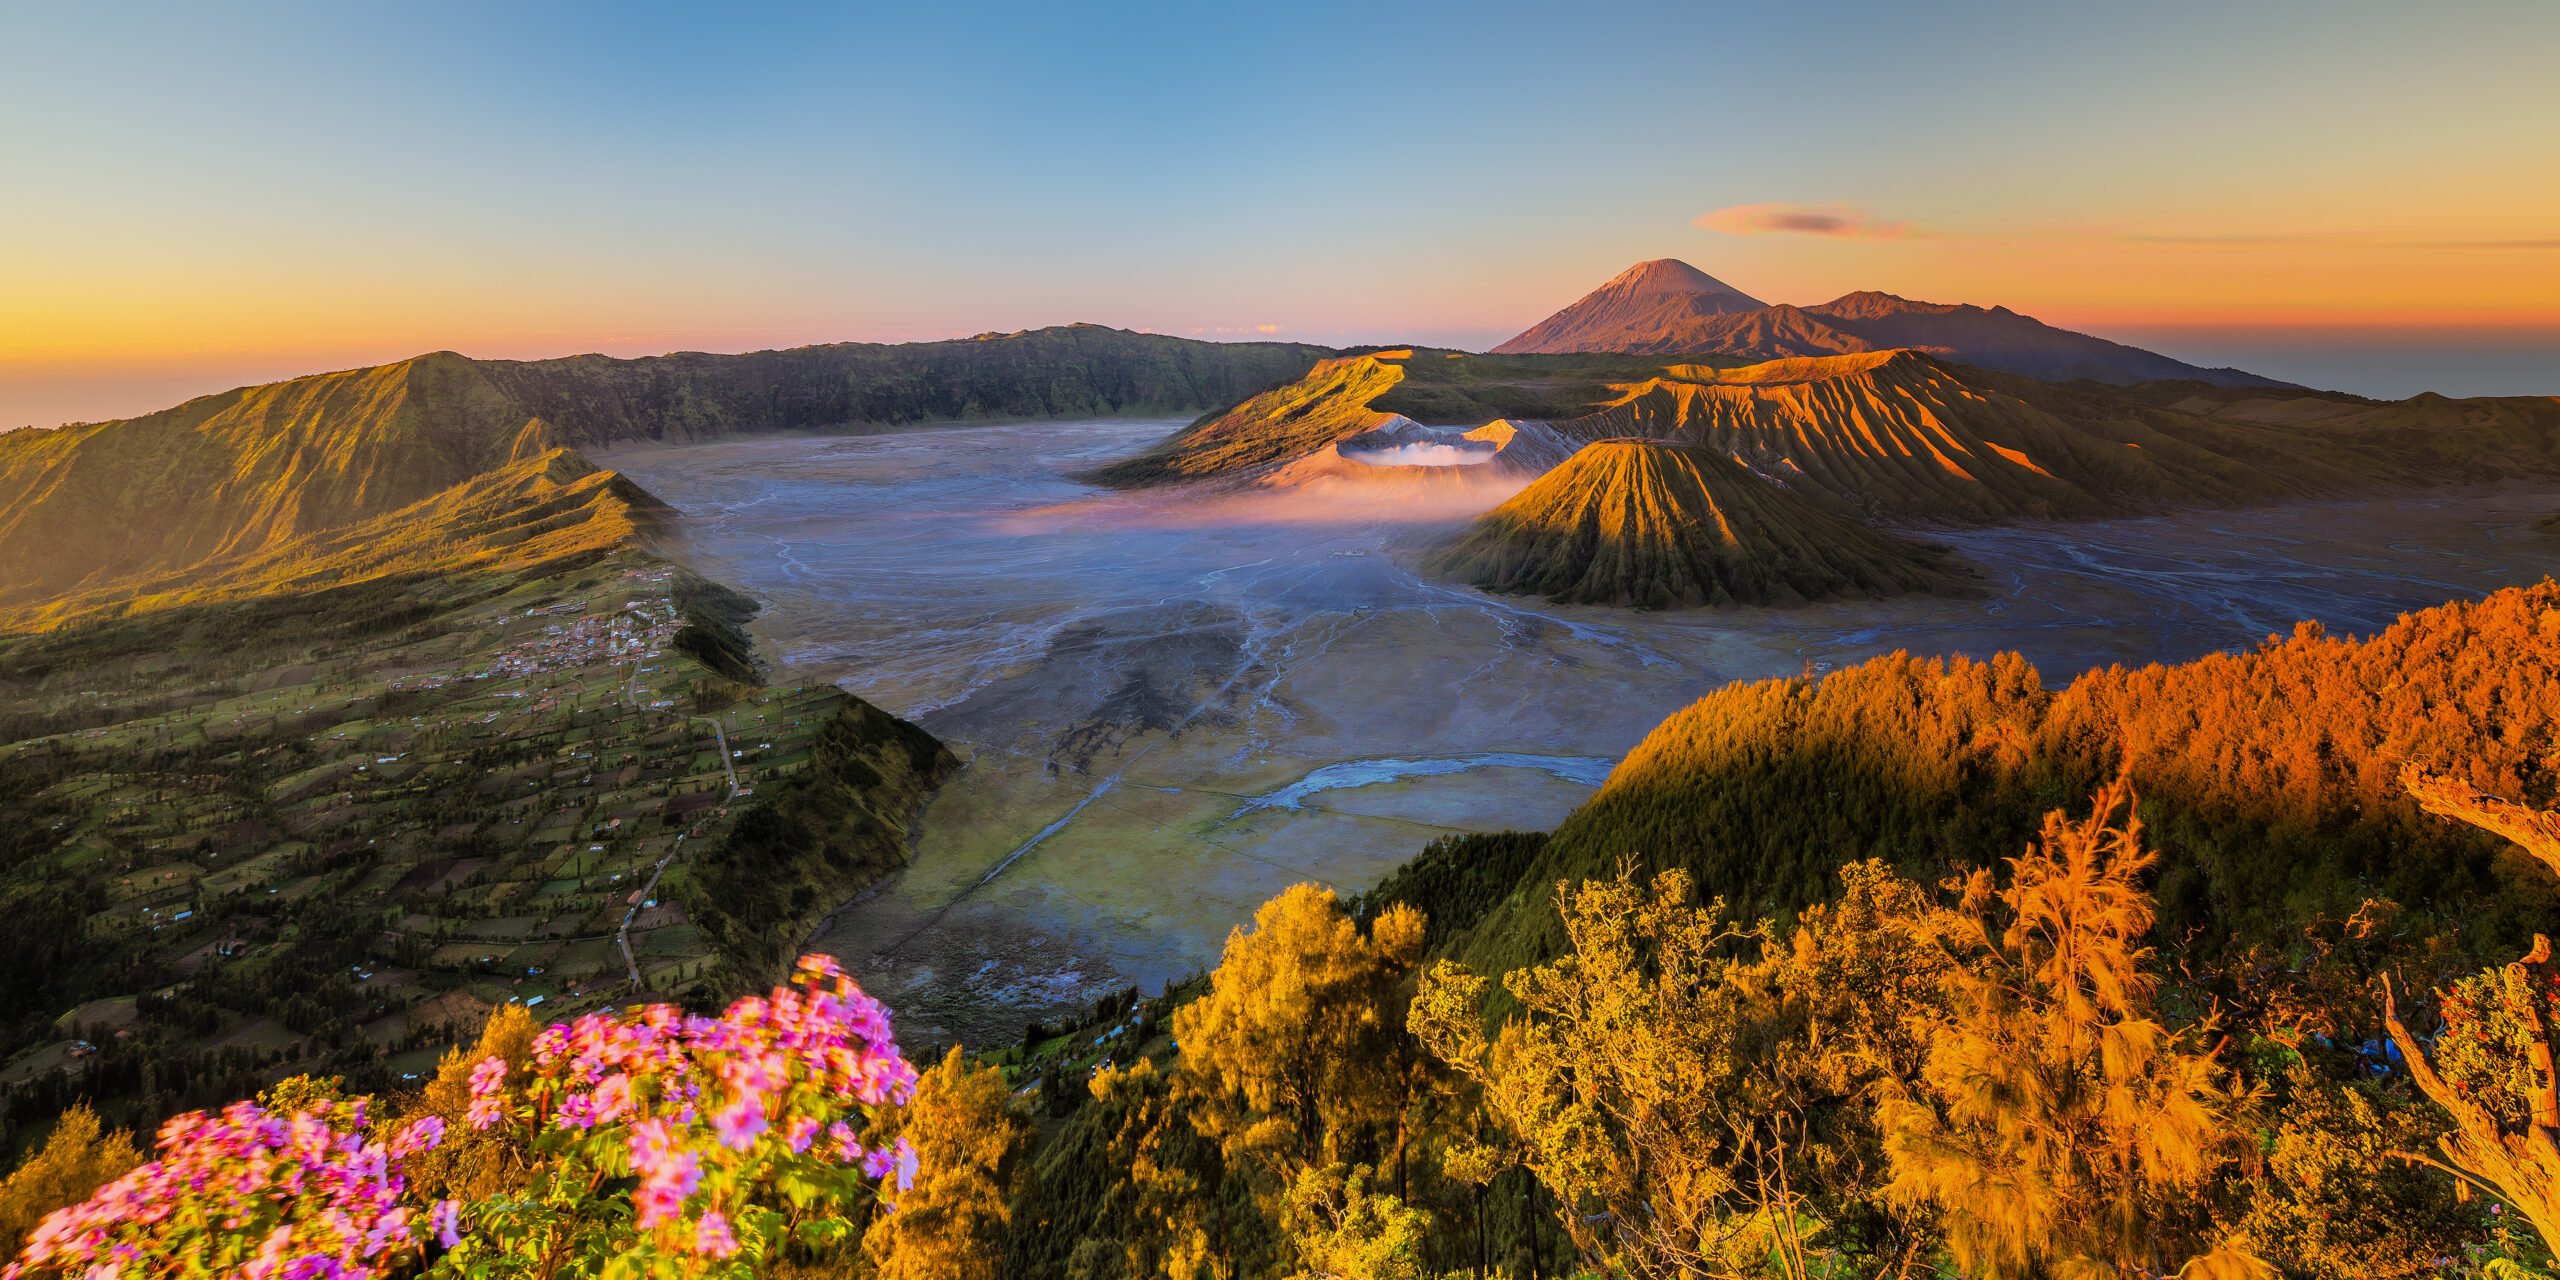 The Amazing Mount Bromo In Our Wonders Of East Java 4 Day V.i.p Tour